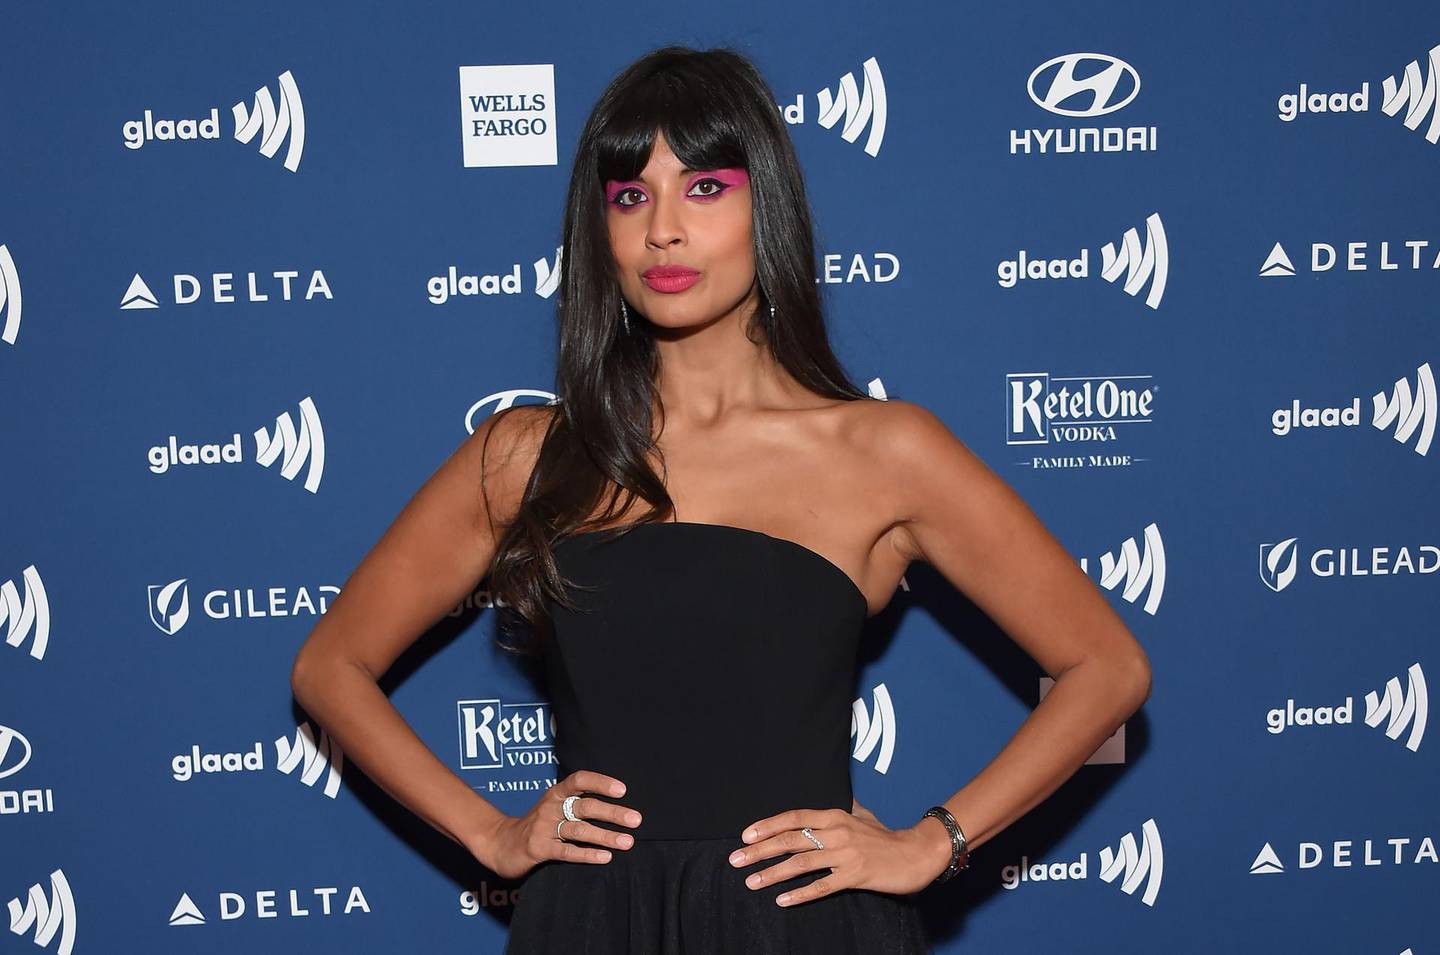 Actress Jameela Jamil arrives at the 30th Annual GLAAD Media Awards at the Beverly Hilton Hotel in Beverly Hills on March 28, 2019. / AFP / LISA O'CONNOR
